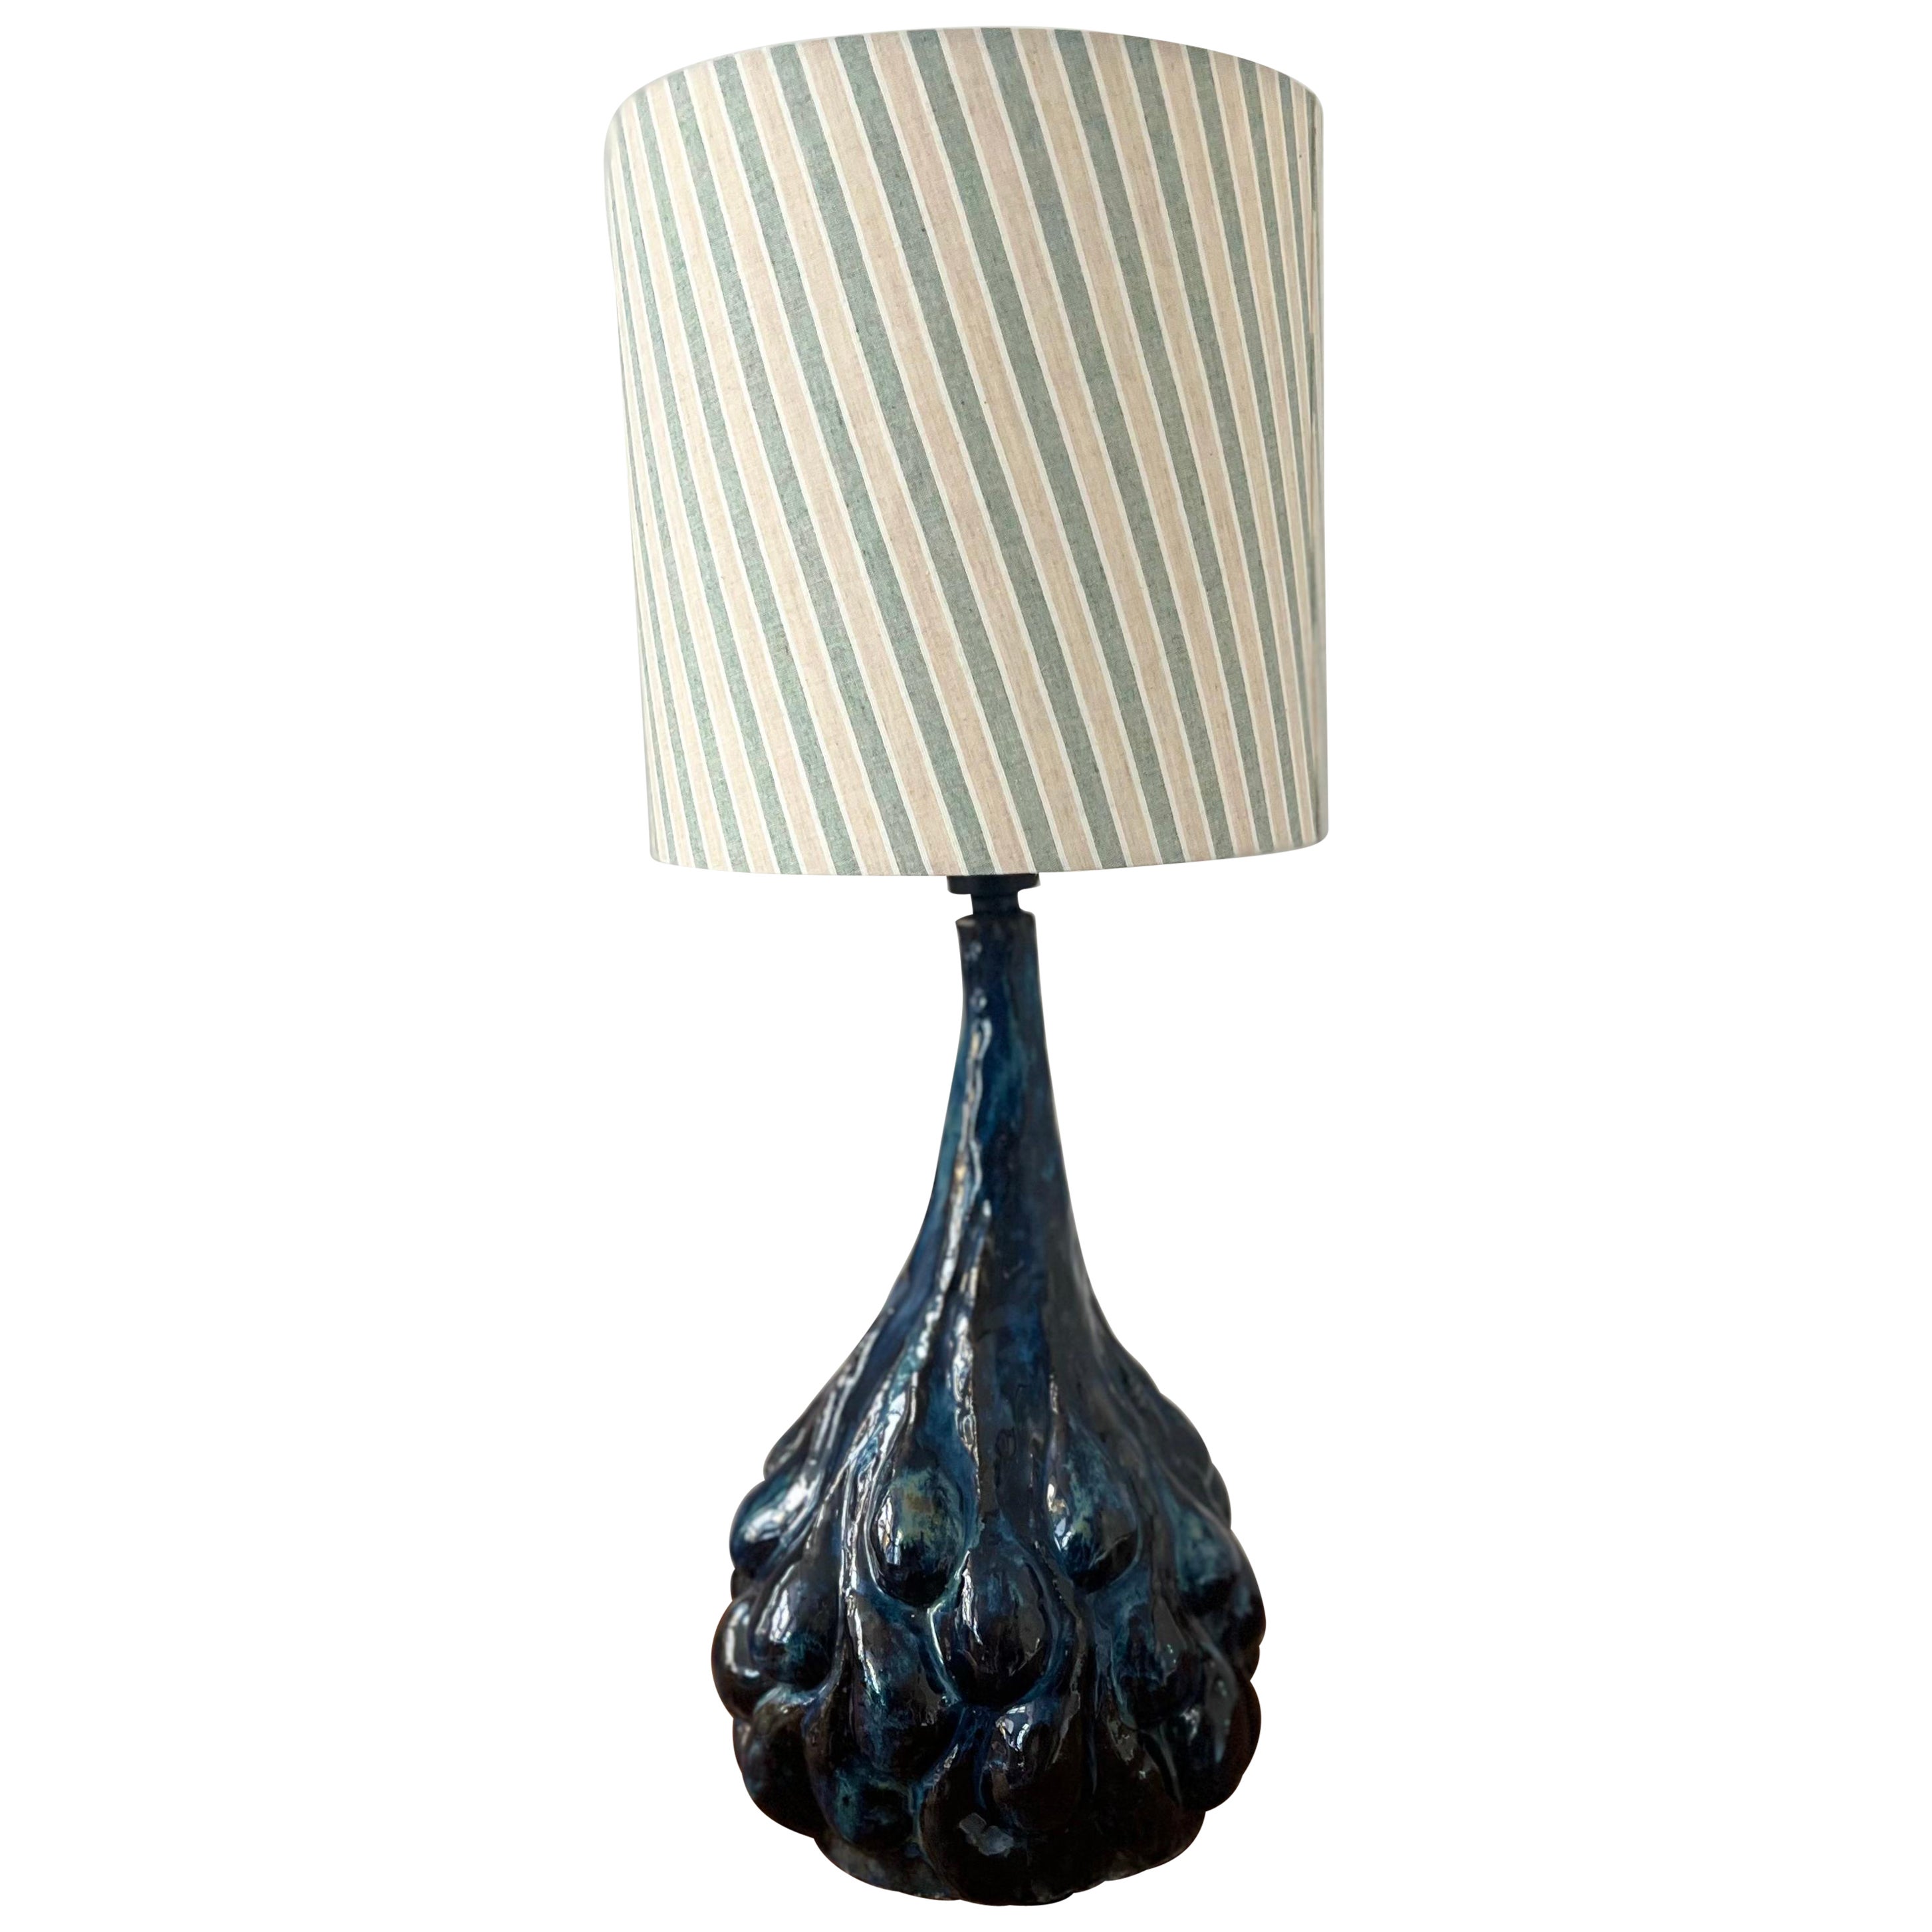 Midcentury tall glazed ceramic table lamp in the style of Axel Salto